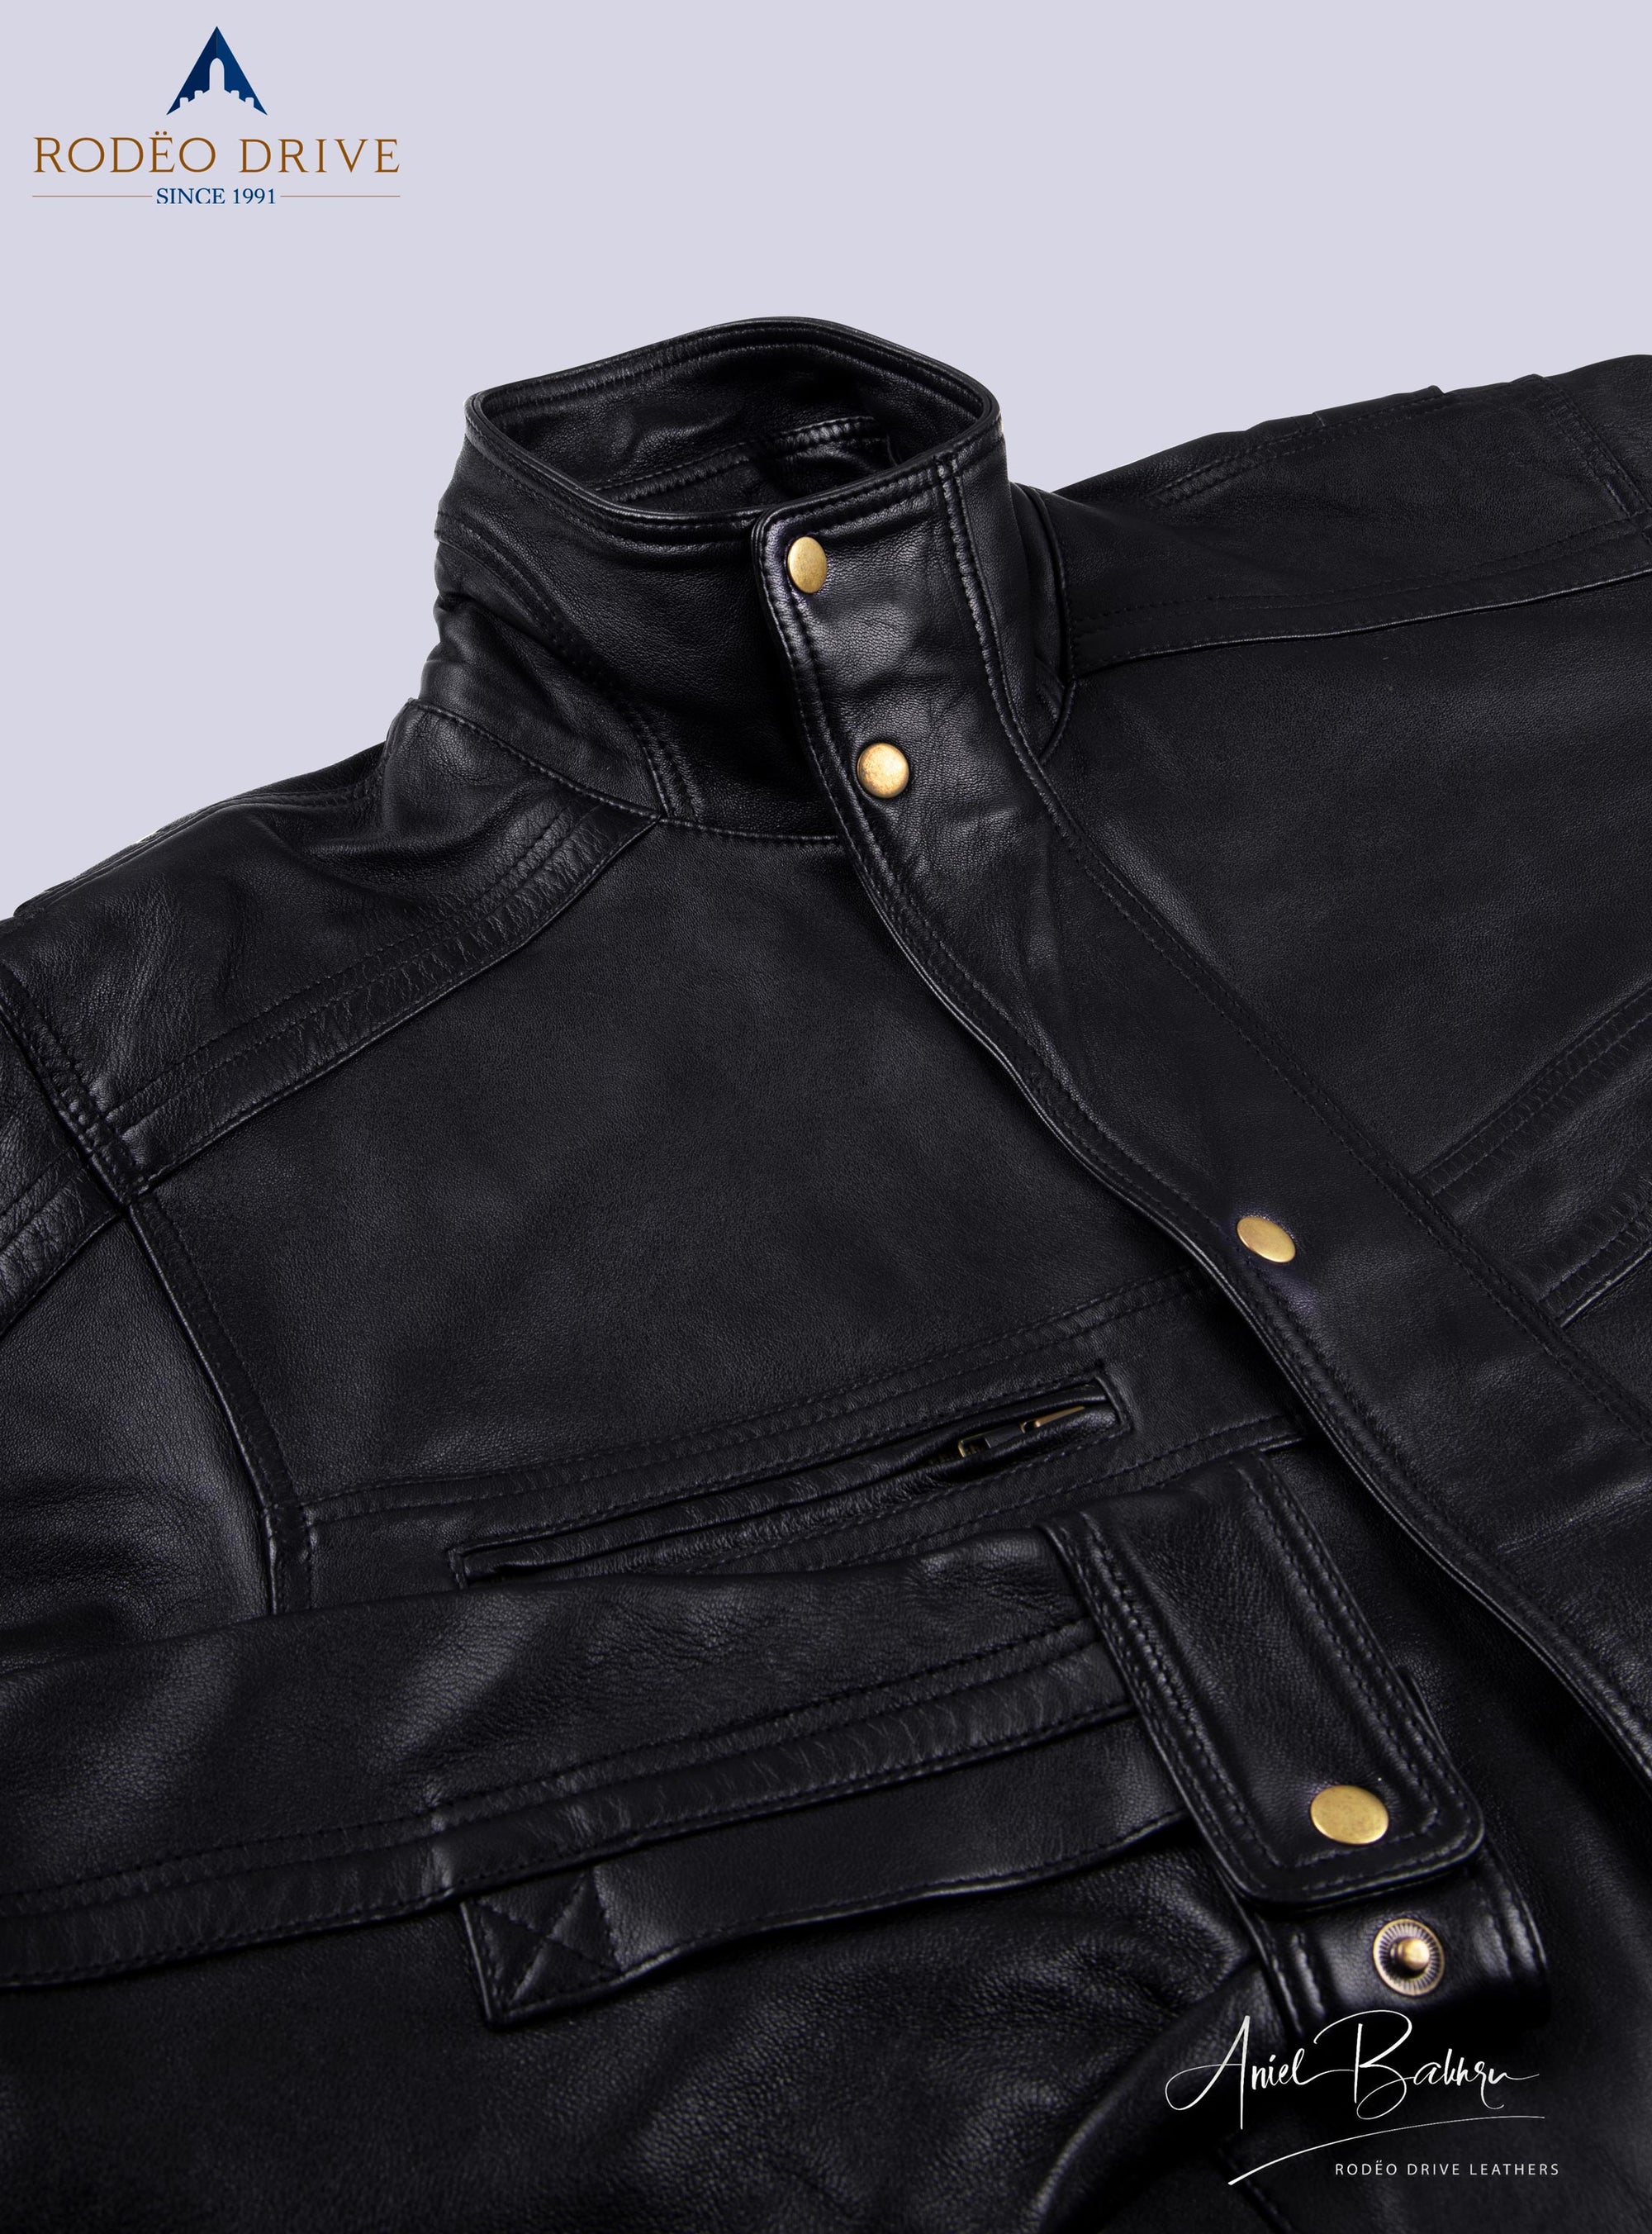 Image of right pocket of bomber jacket. Pocket is zipped . A stylish strap is  tucked just below it.